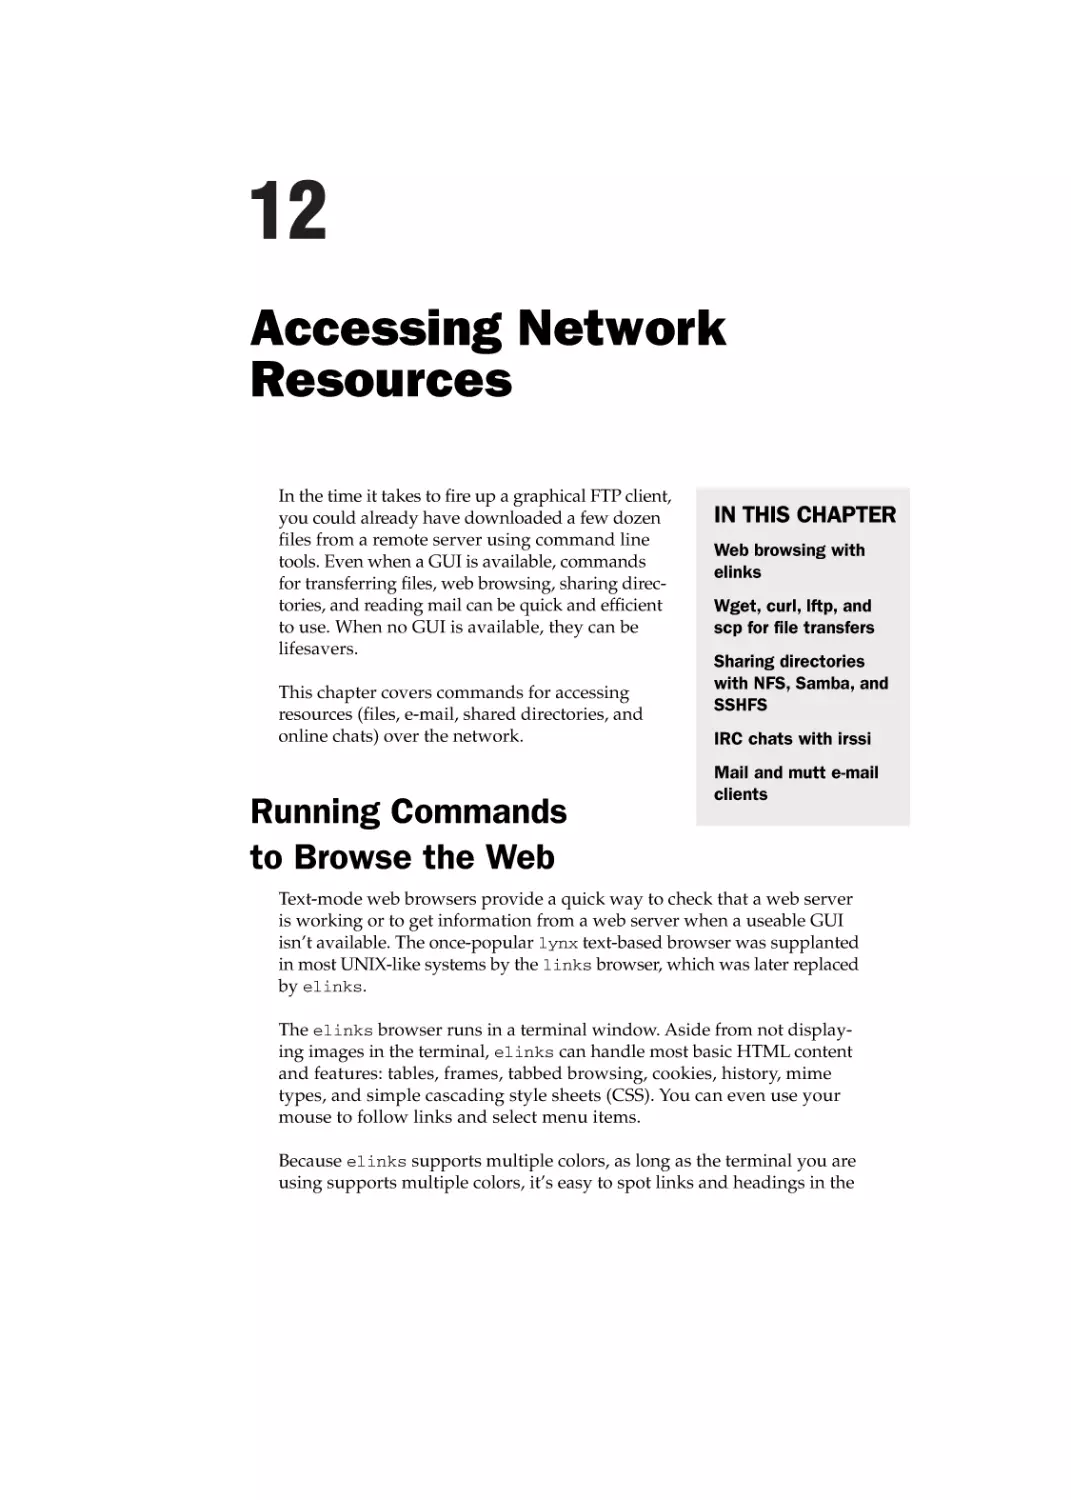 Chapter 12
Running Commands to Browse the Web